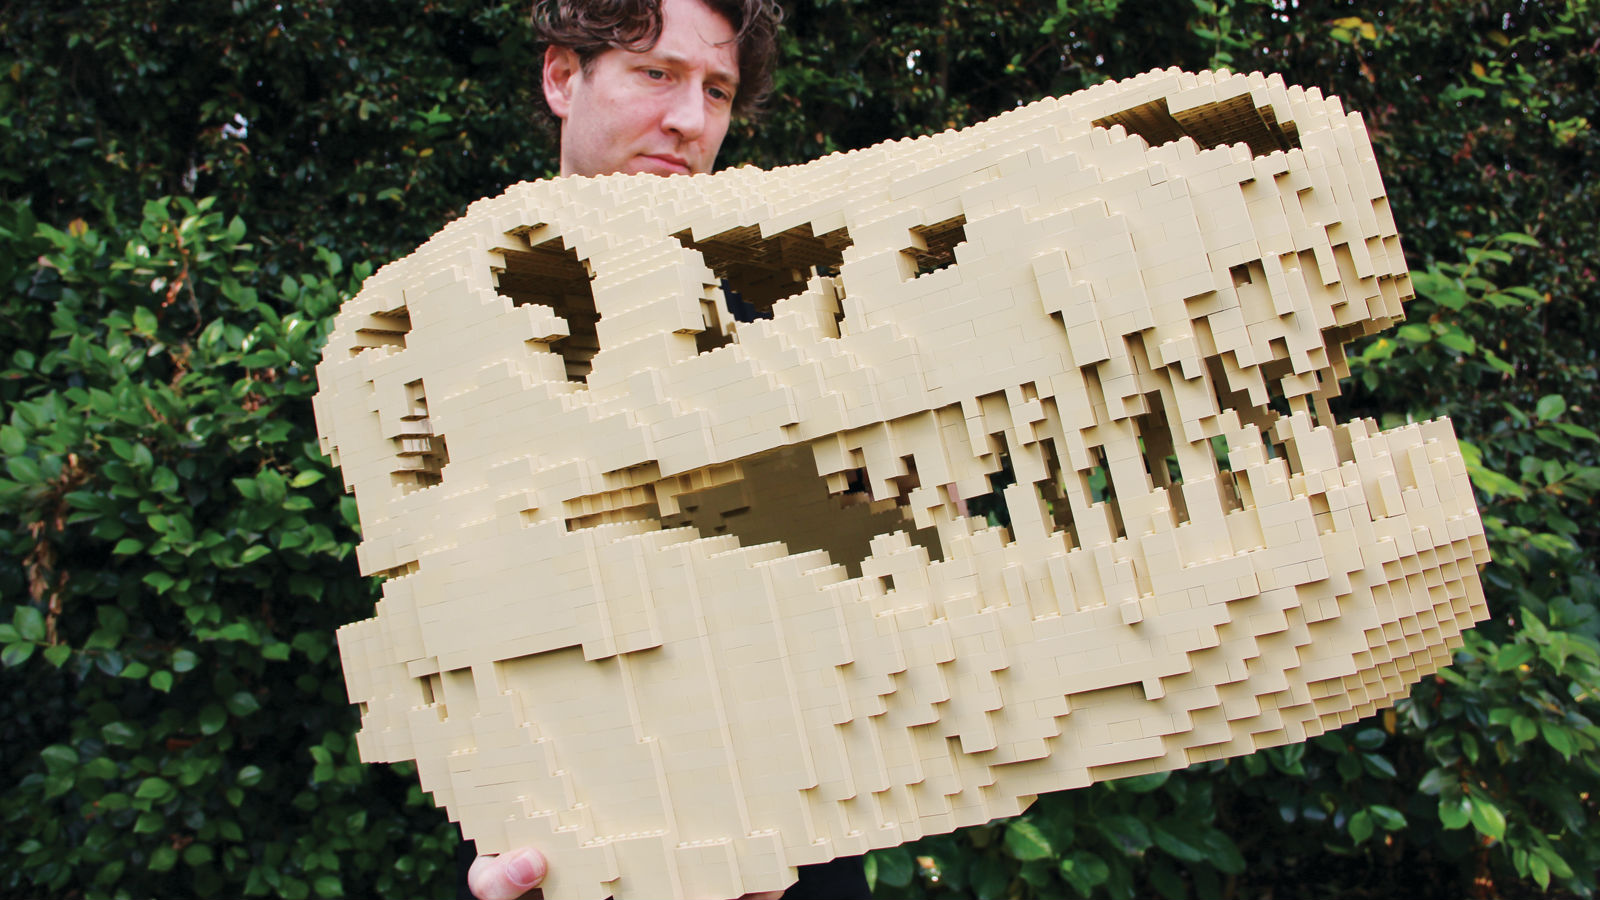 So This Is What Inspires Someone To Build A Life-Size LEGO T-Rex